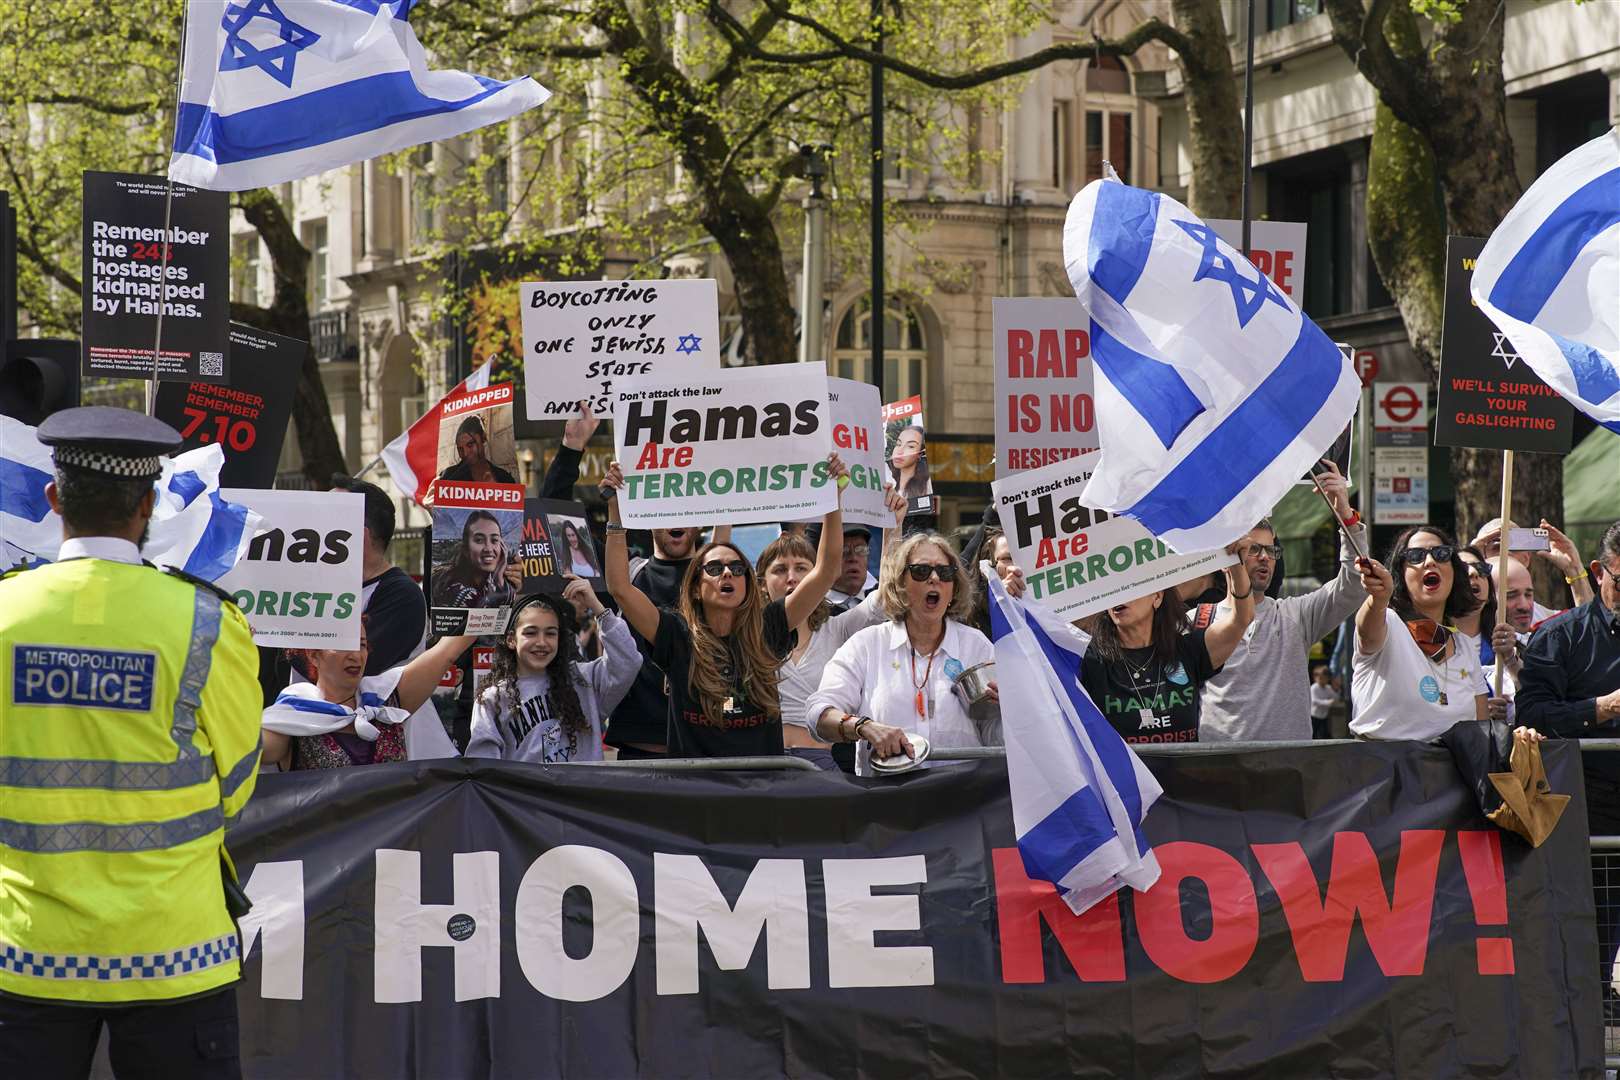 A significantly smaller pro-Israel counter-demonstration also took place at Aldwych (Jeff Moore/PA)